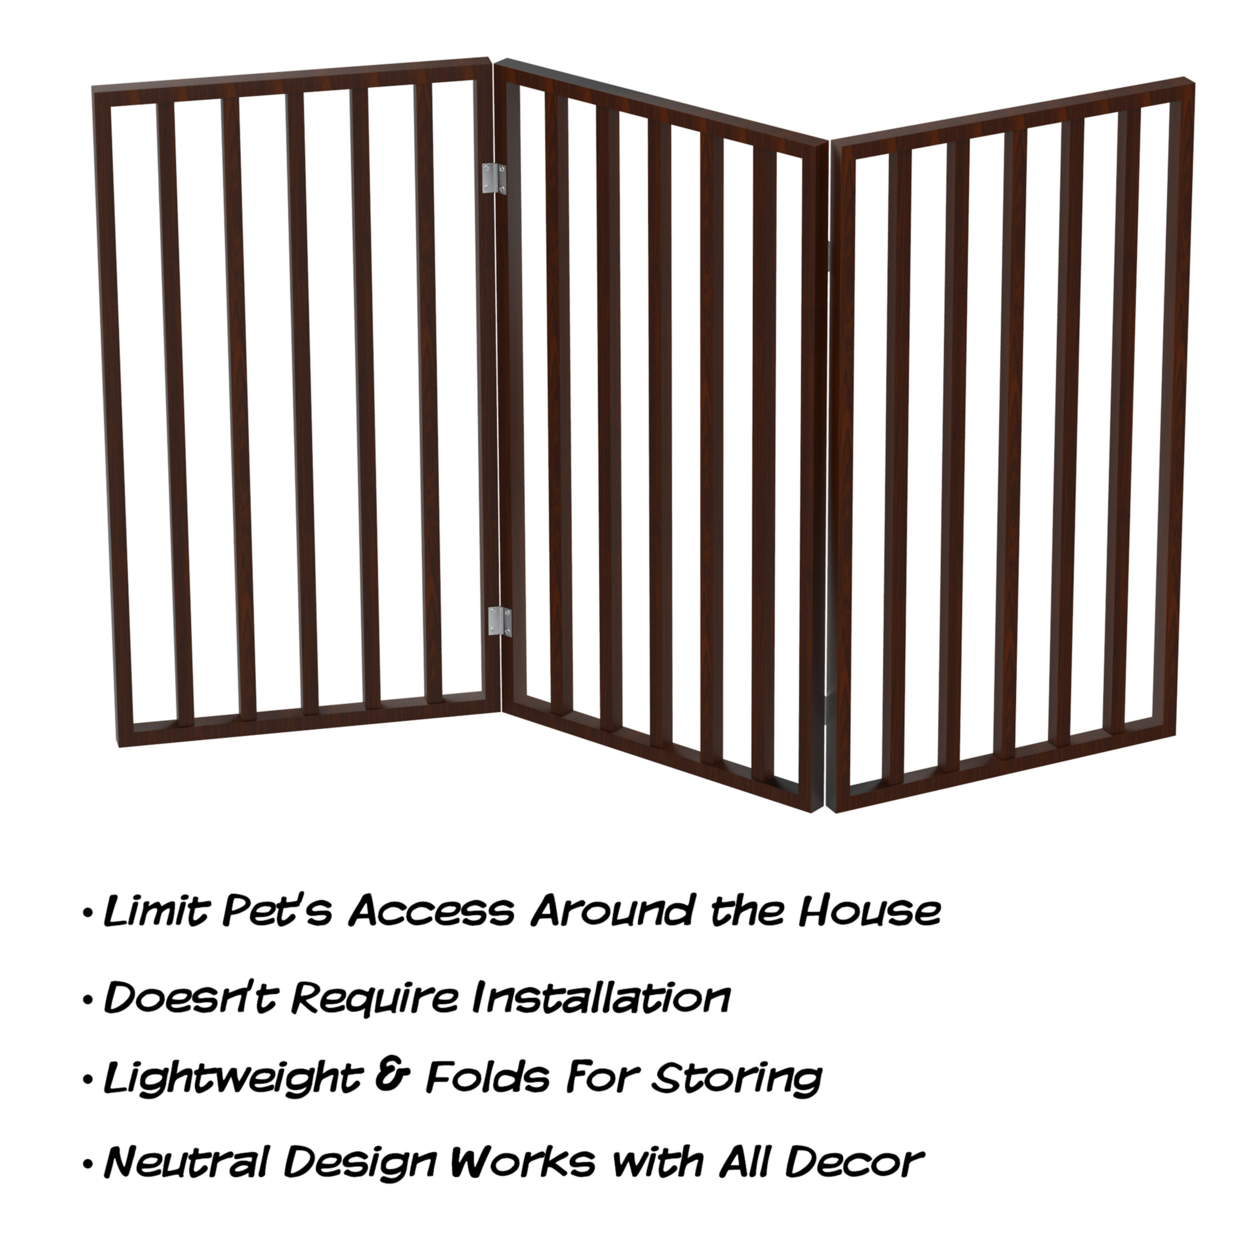 Wooden Pet Gate- Tall Freestanding 3-Panel Indoor Barrier Fence, Lightweight And Foldable For Dogs, Puppies, Pets- 54 X32 (Dark Brown)